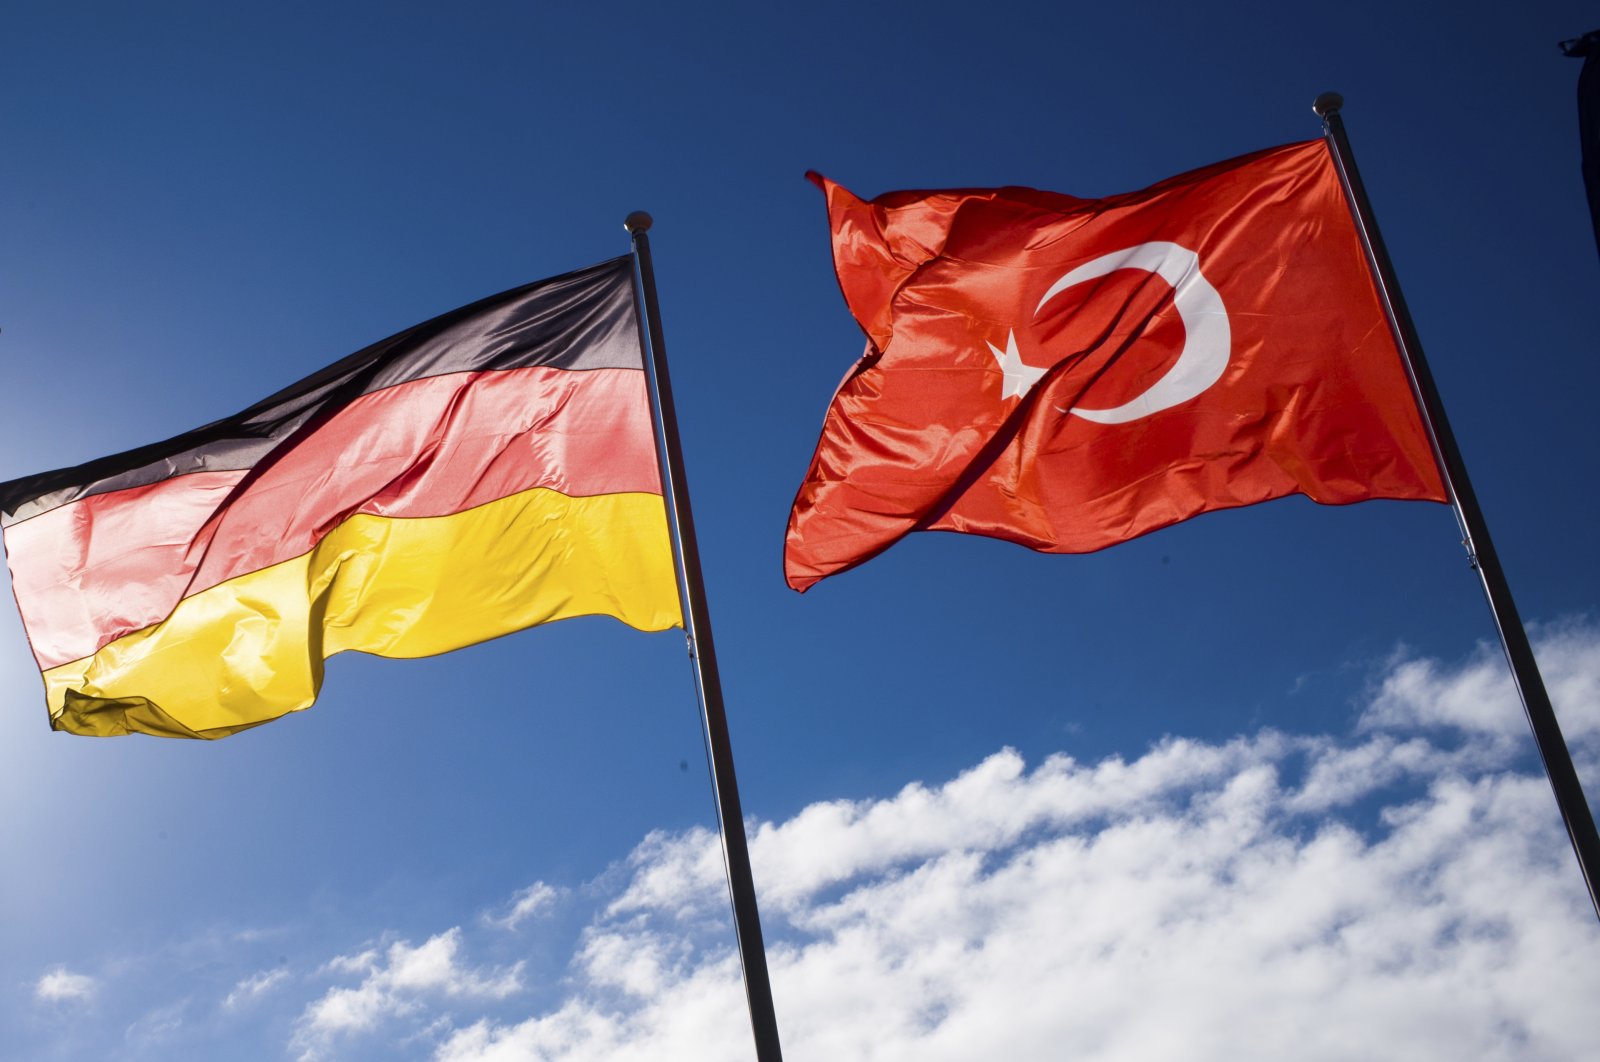 A German and Turkish flag wave at the Tegel airport prior to the arrival of President Recep Tayyip Erdoğan for an official state visit in Germany at the capital Berlin, Thursday, Sept. 27, 2018. (AP File Photo)